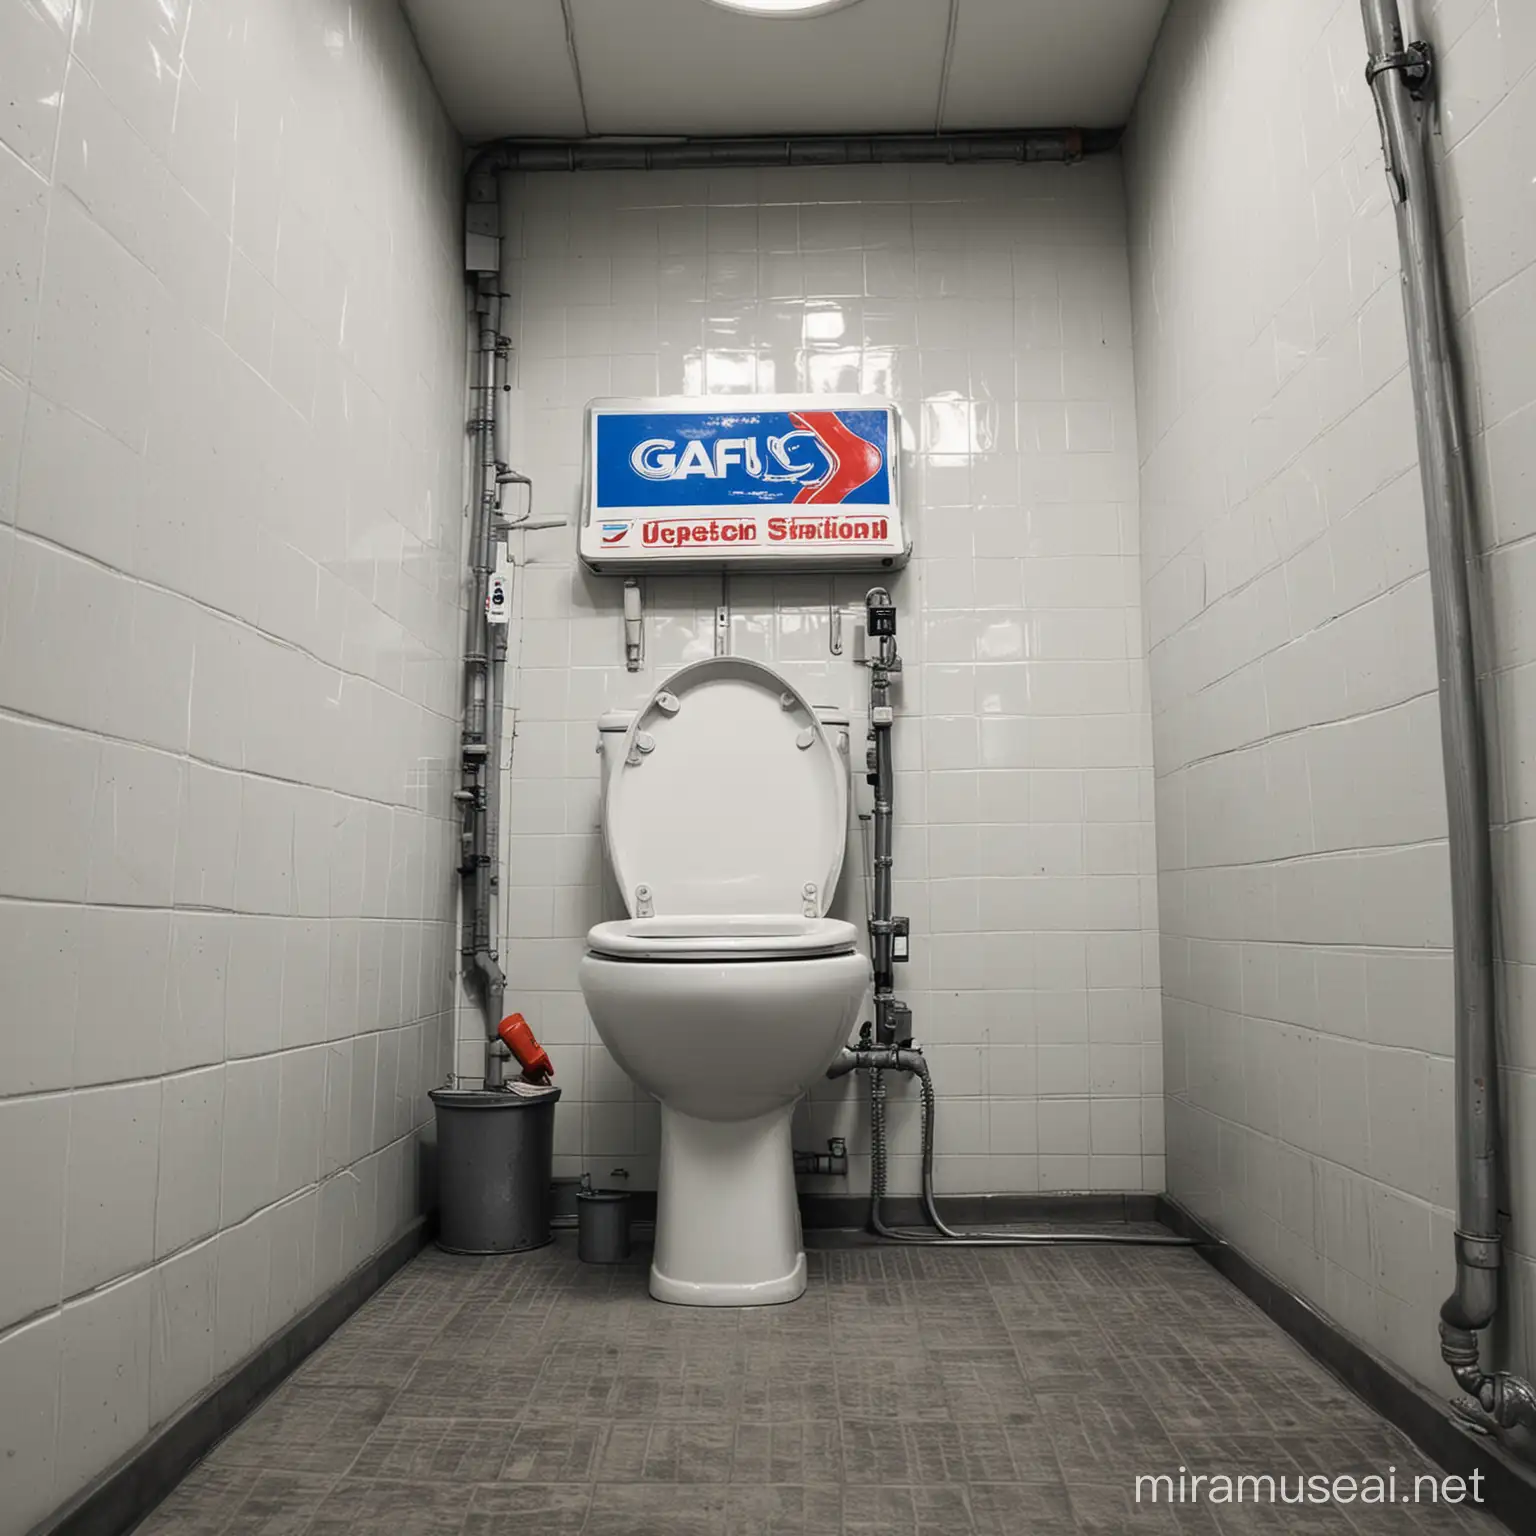 CloseUp Realistic Gas Station Restroom from Low Angle